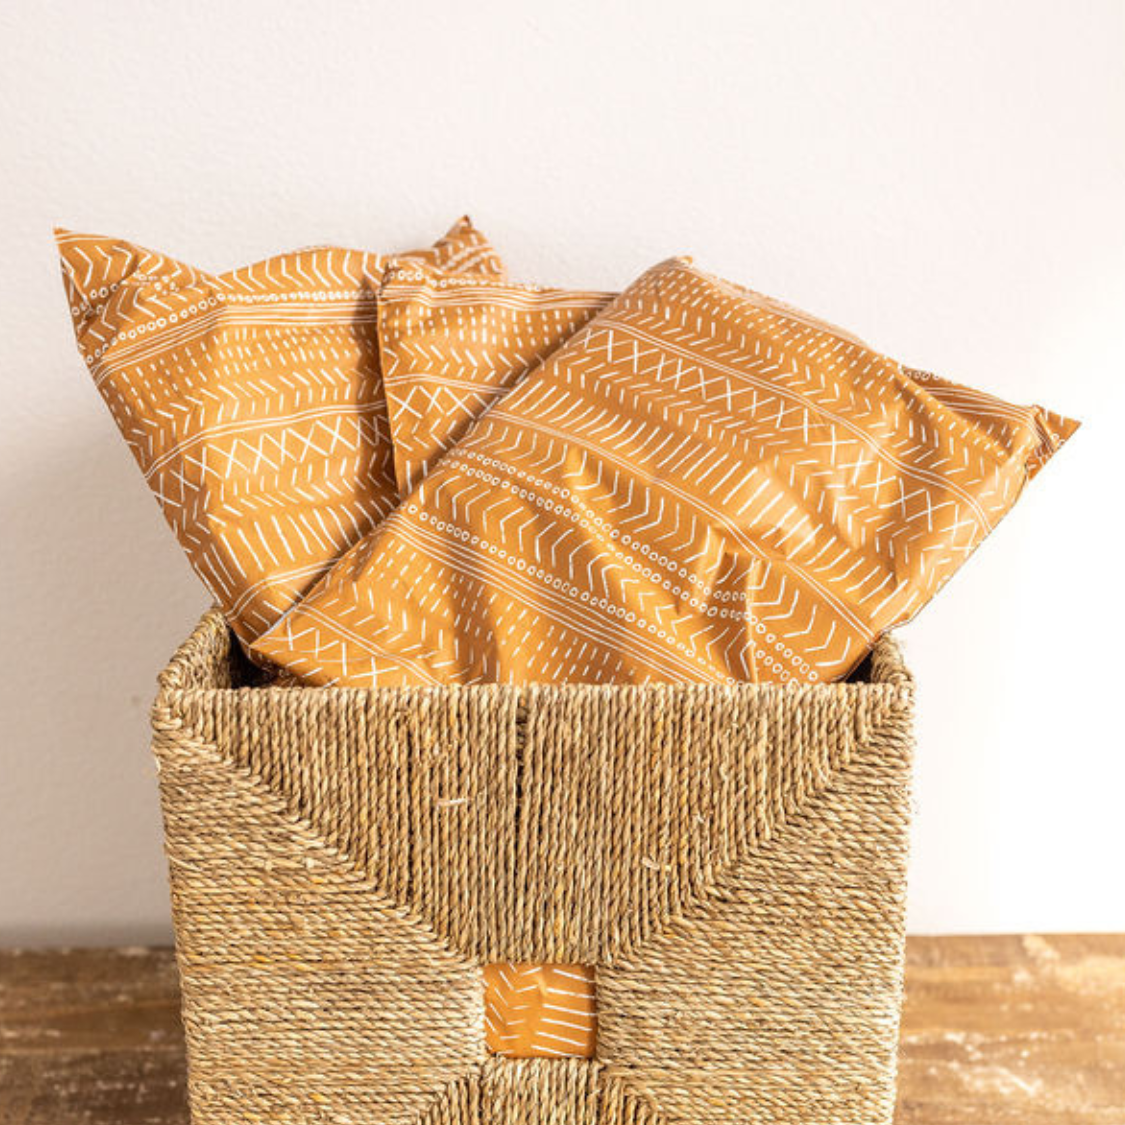 Boho Brown Poly Mailers from Favorite Supplies arranged on a table and neatly stacked in a basket. Ready for shipping with their charming white block-printed boho line design.